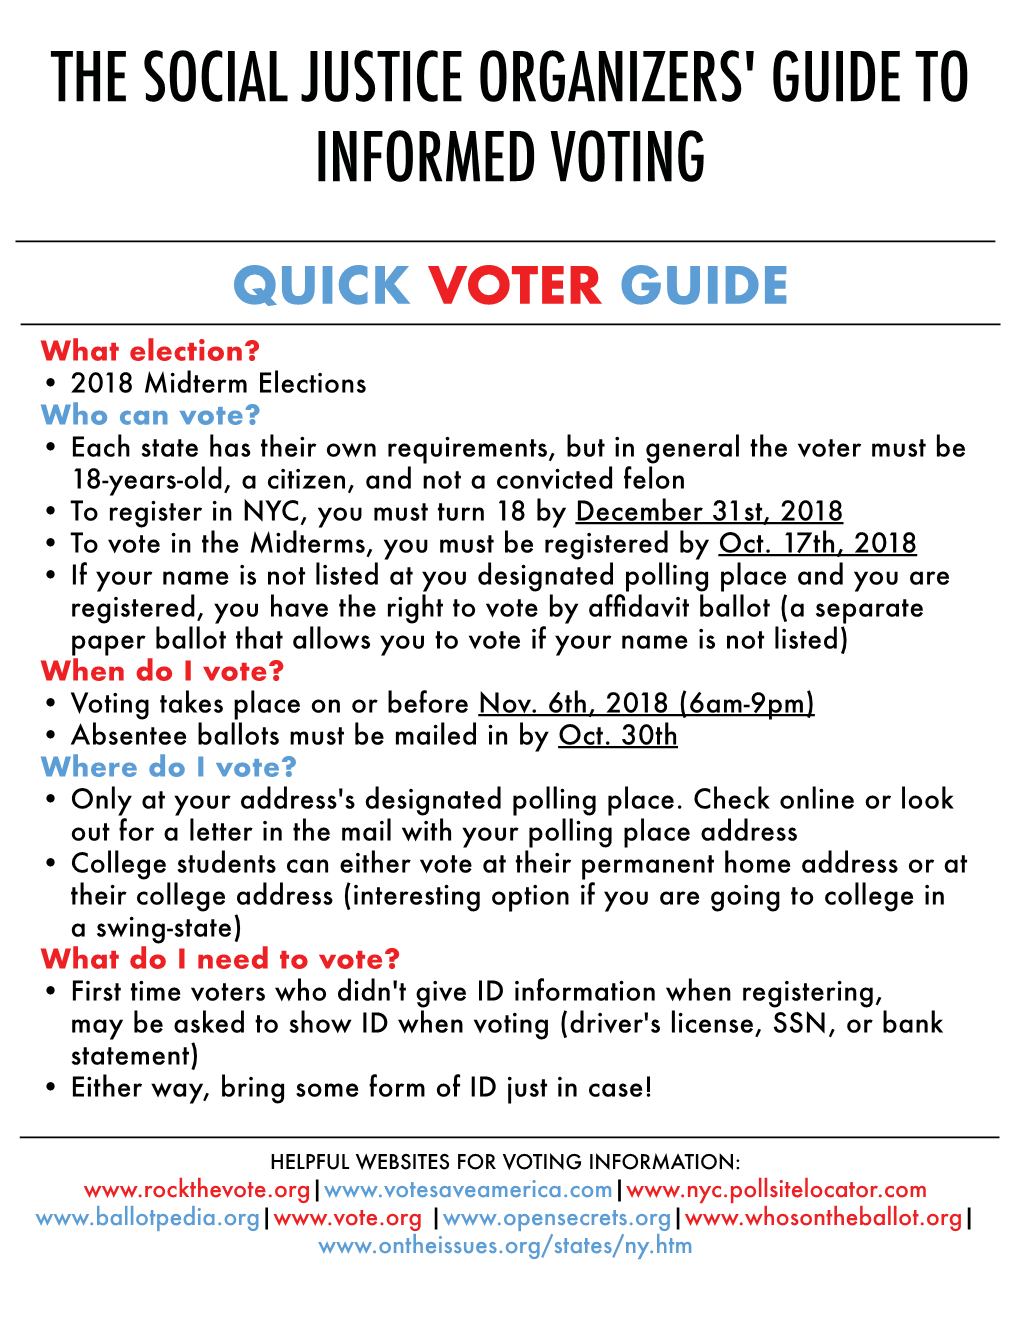 The Social Justice Organizers' Guide to Informed Voting